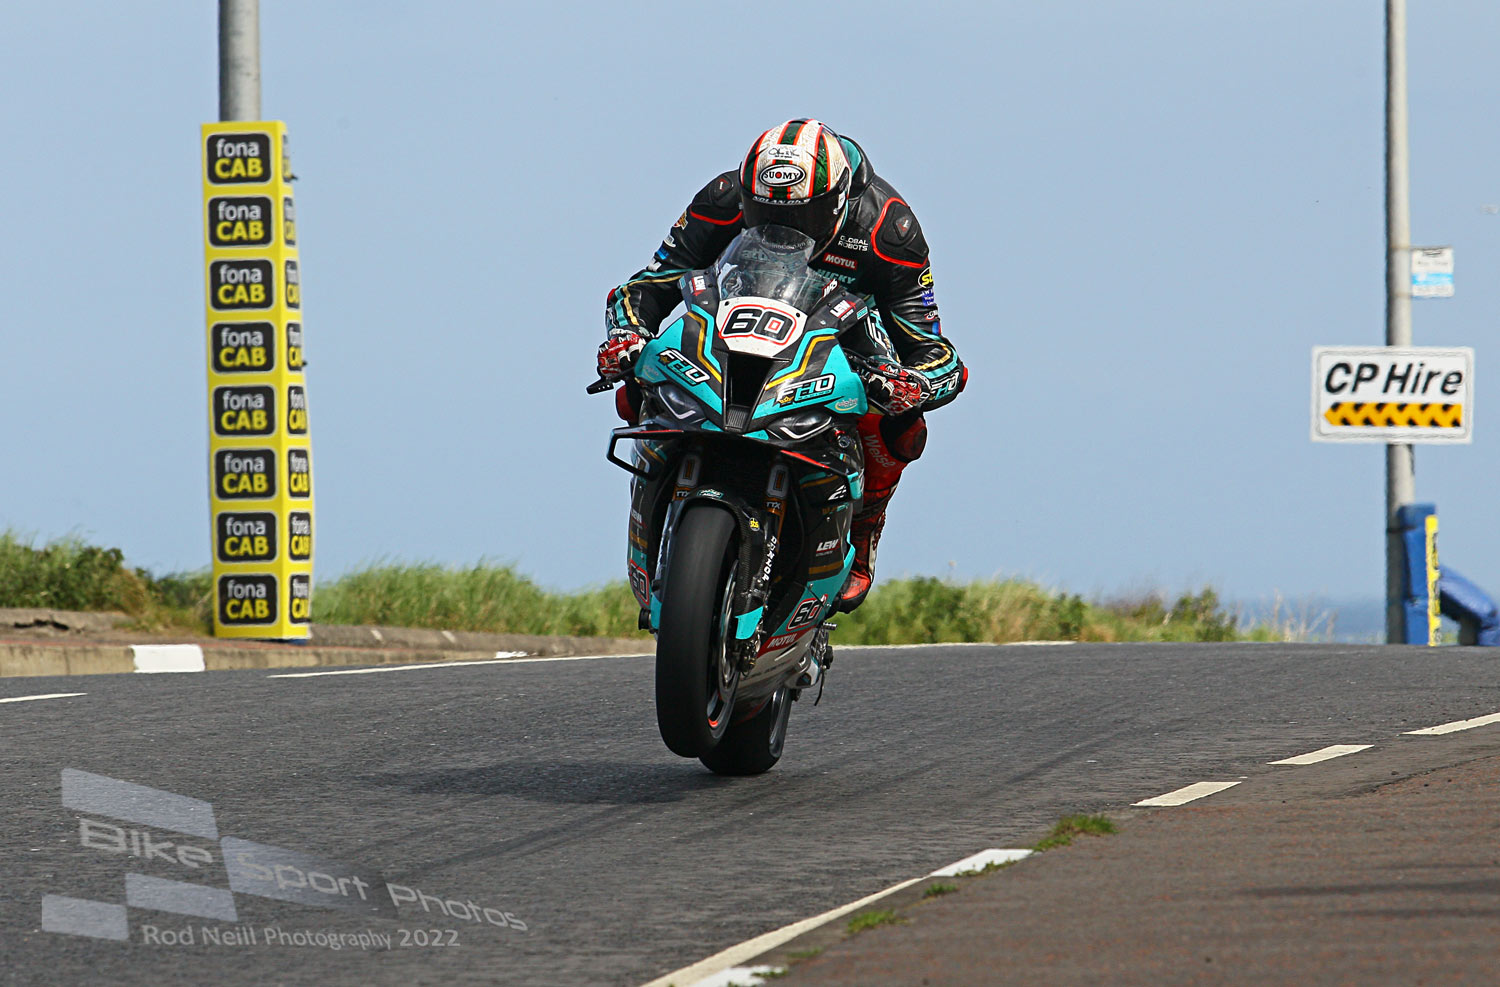 NW200 Latest: World Class Entry Disclosed